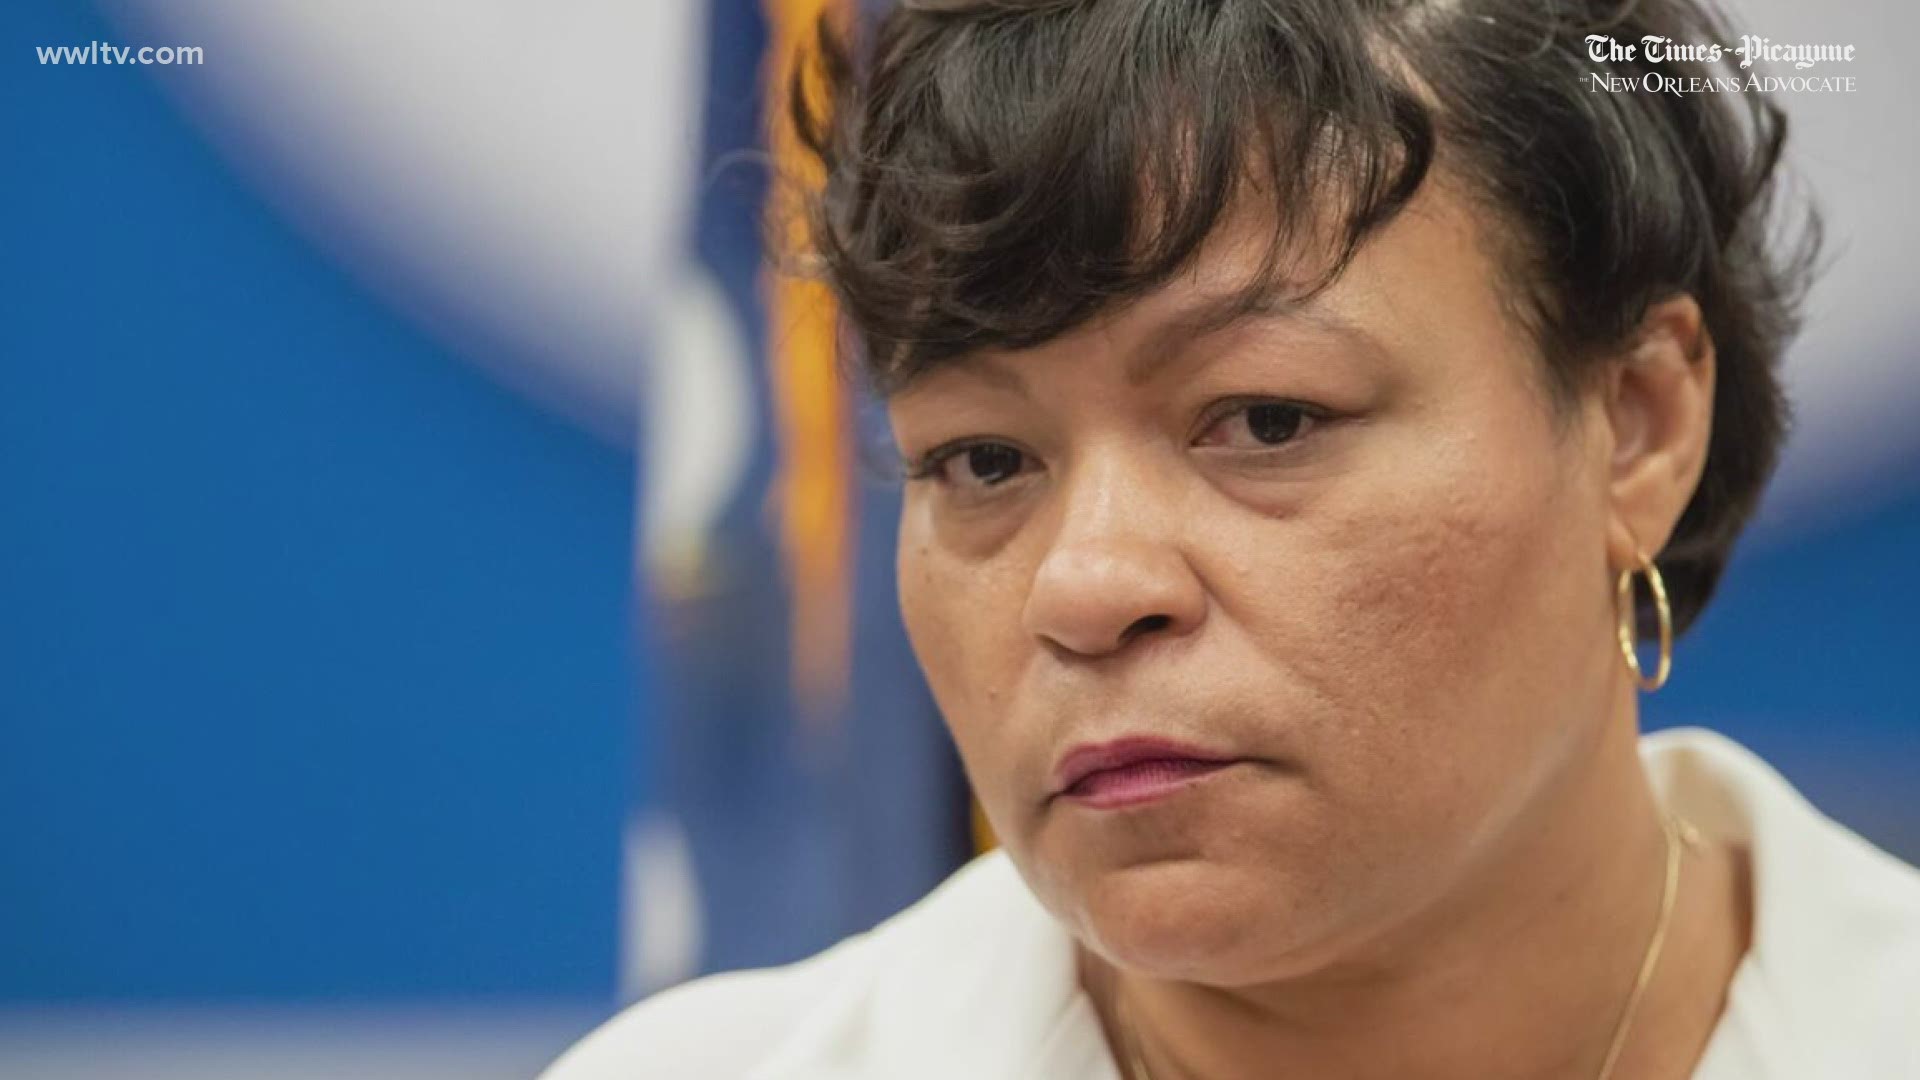 New Orleans Mayor LaToya Cantrell saw her tax proposals voted down and her endorsed candidate for DA defeated.